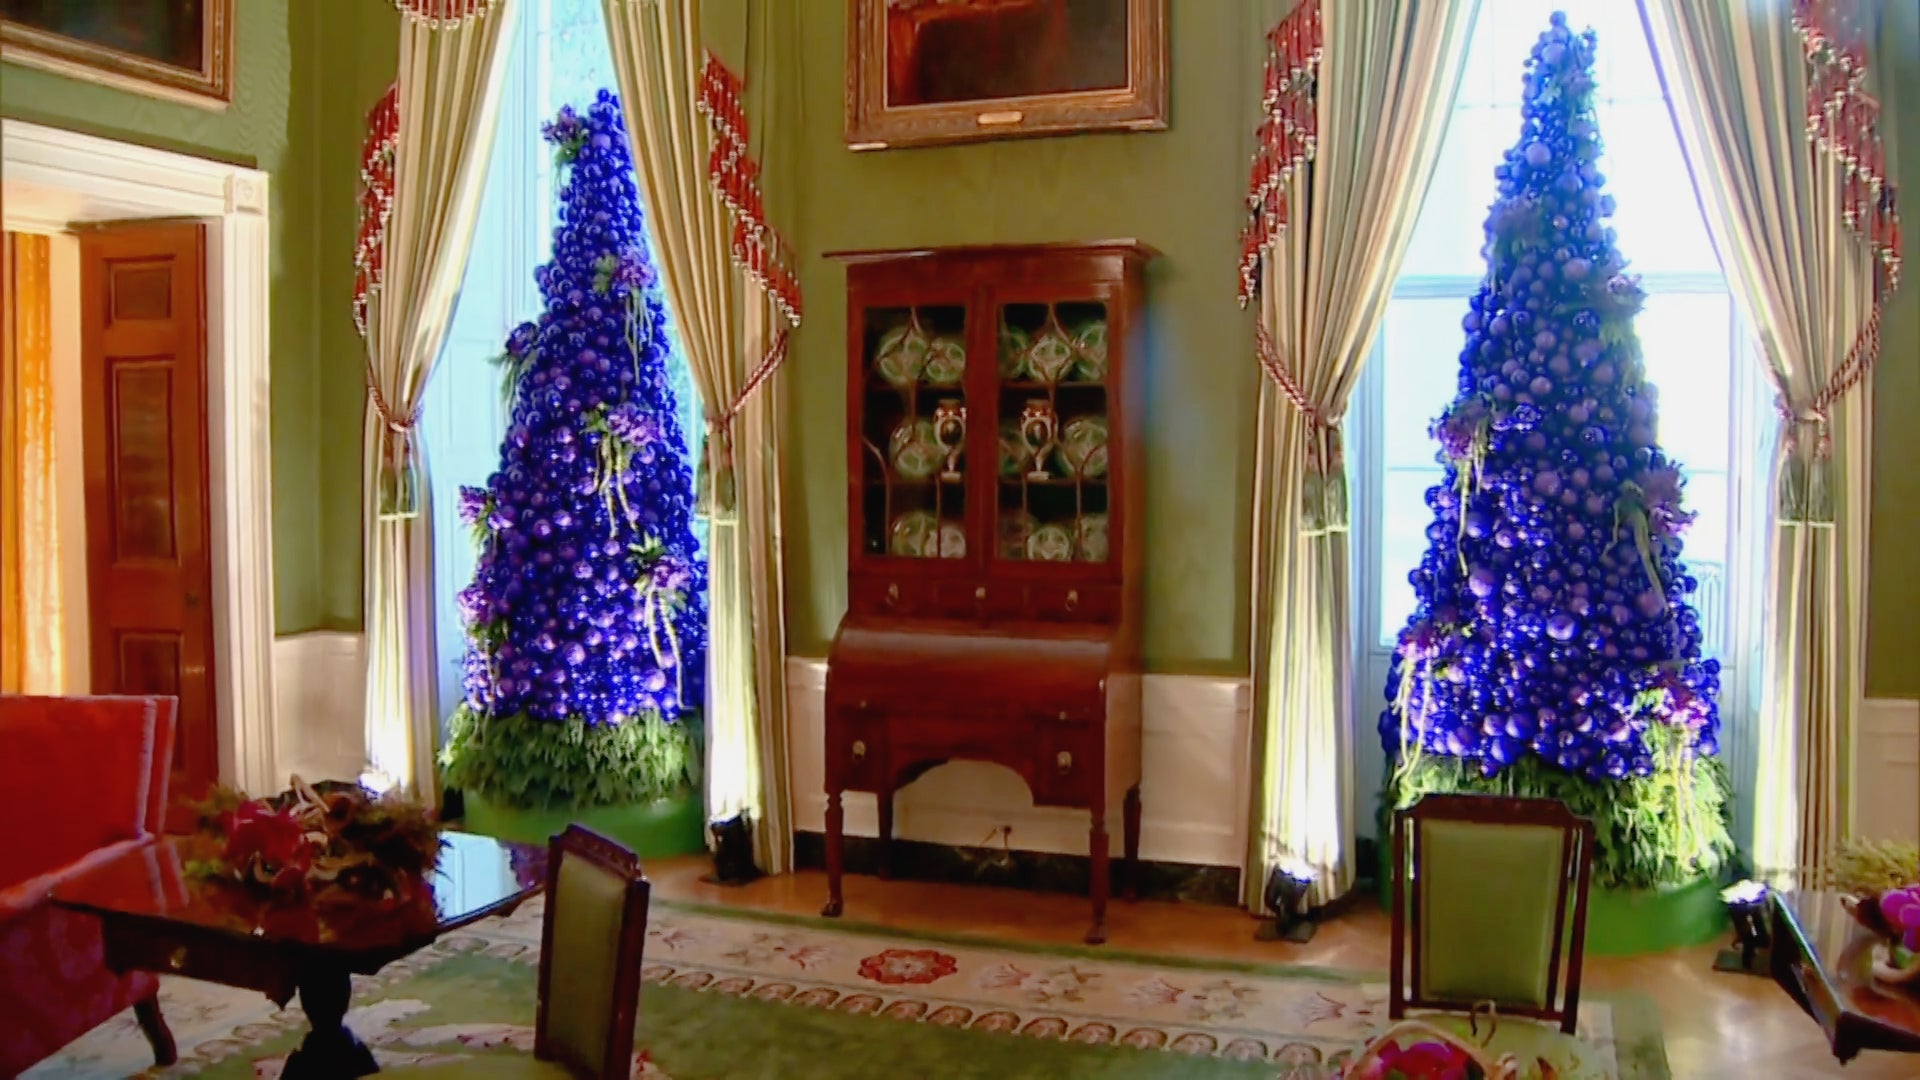 The 2021 White House Christmas Decorations Are Up | Inside Edition